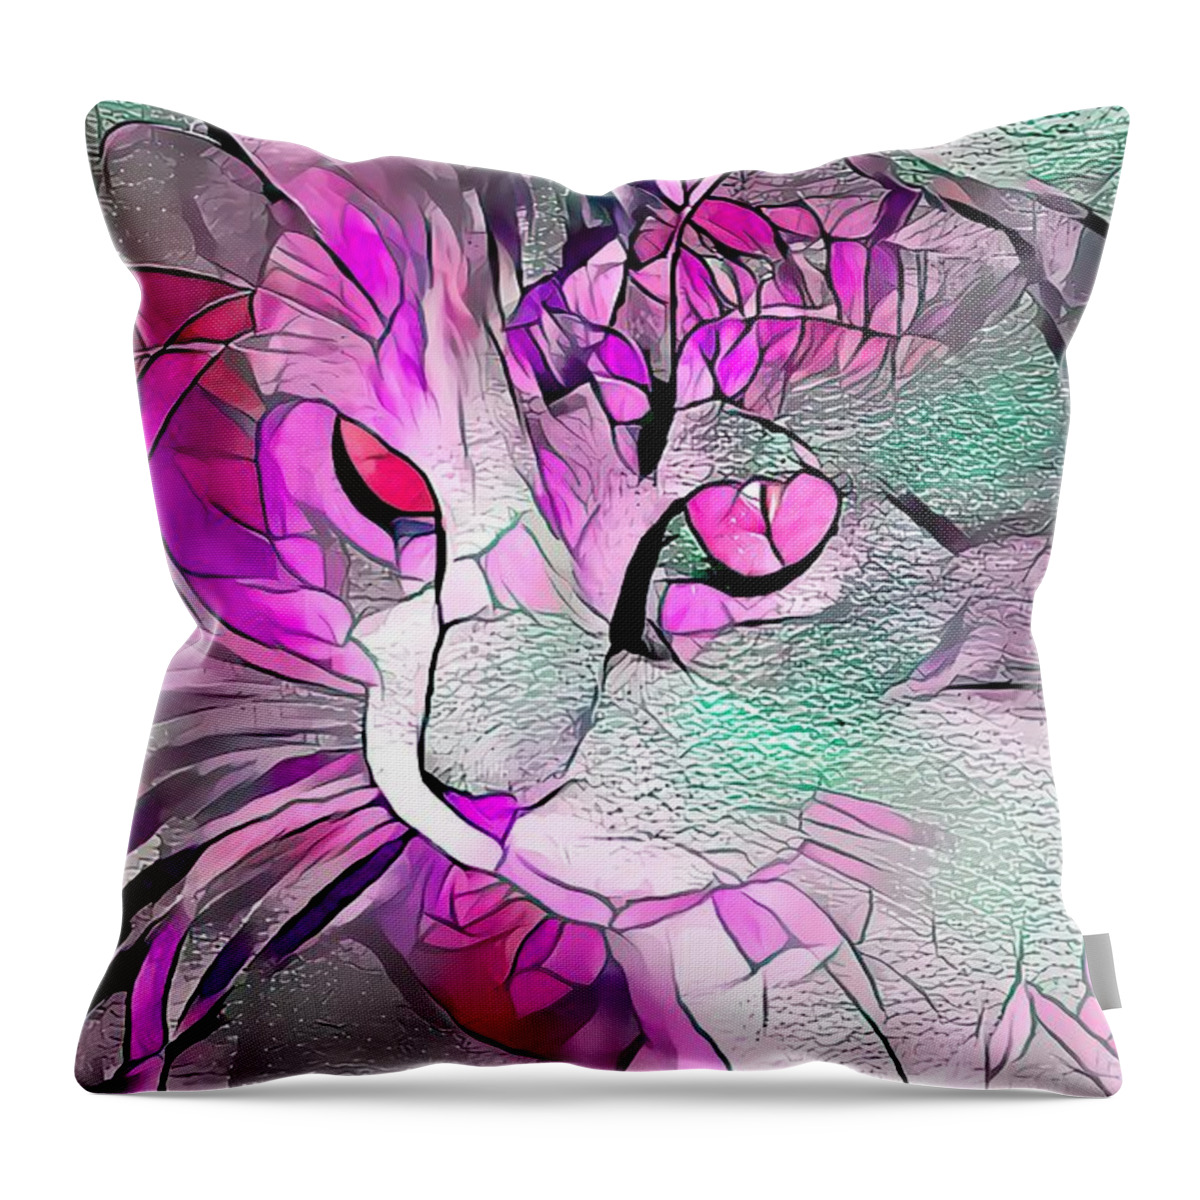 Glass Throw Pillow featuring the digital art Super Stained Glass Kitten Pink by Don Northup